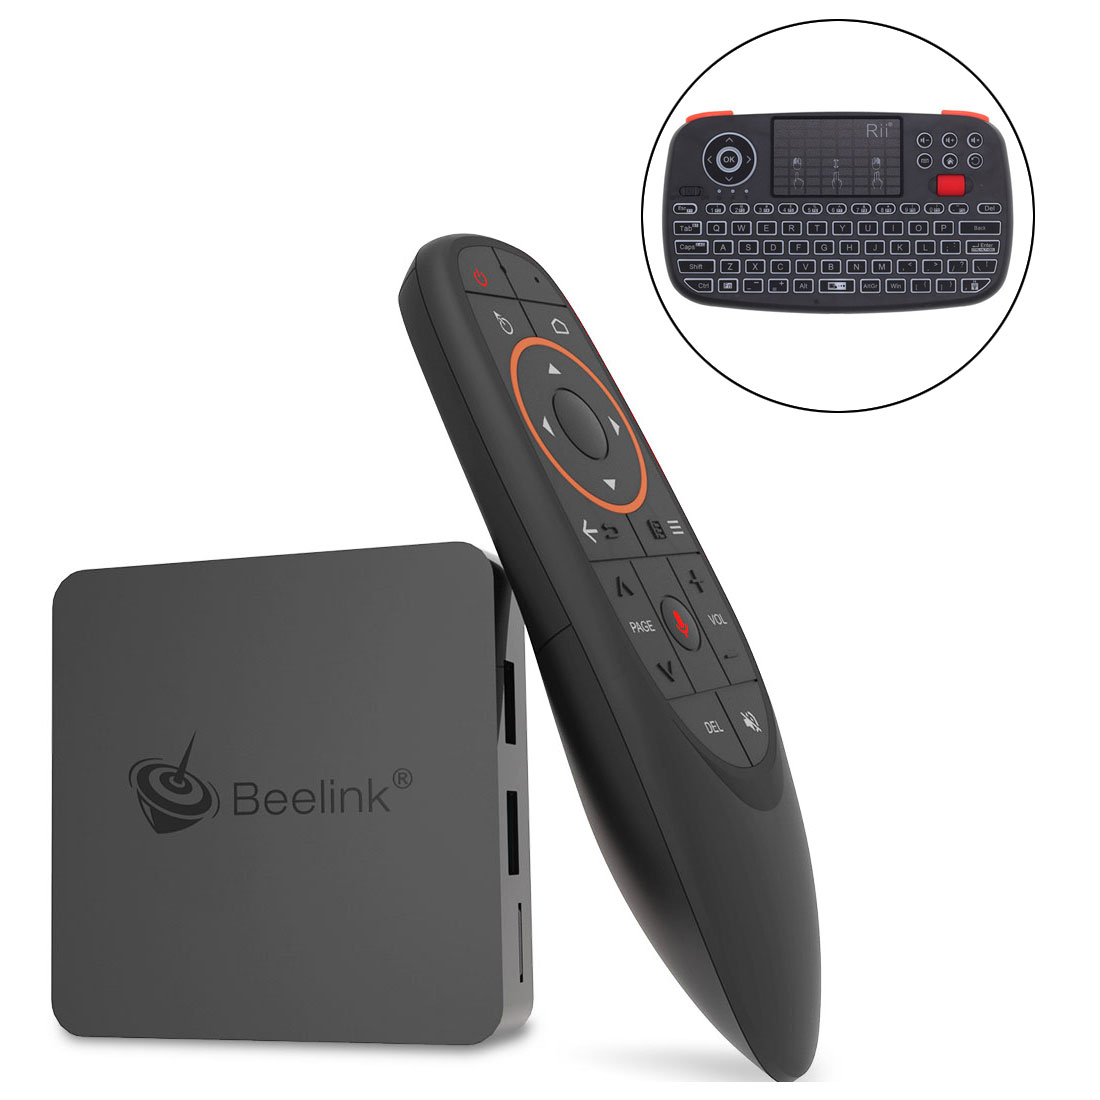 

Beelink GT MINI-A S905X2 4GB DDR4 32GB 5G WIFI bluetooth 4.0 ITV8.0 4K HDR 10 VP9 H.265 TV Box Support Voice Remote Control HD Netflix 4K Youtube with RII Air Mouse EU